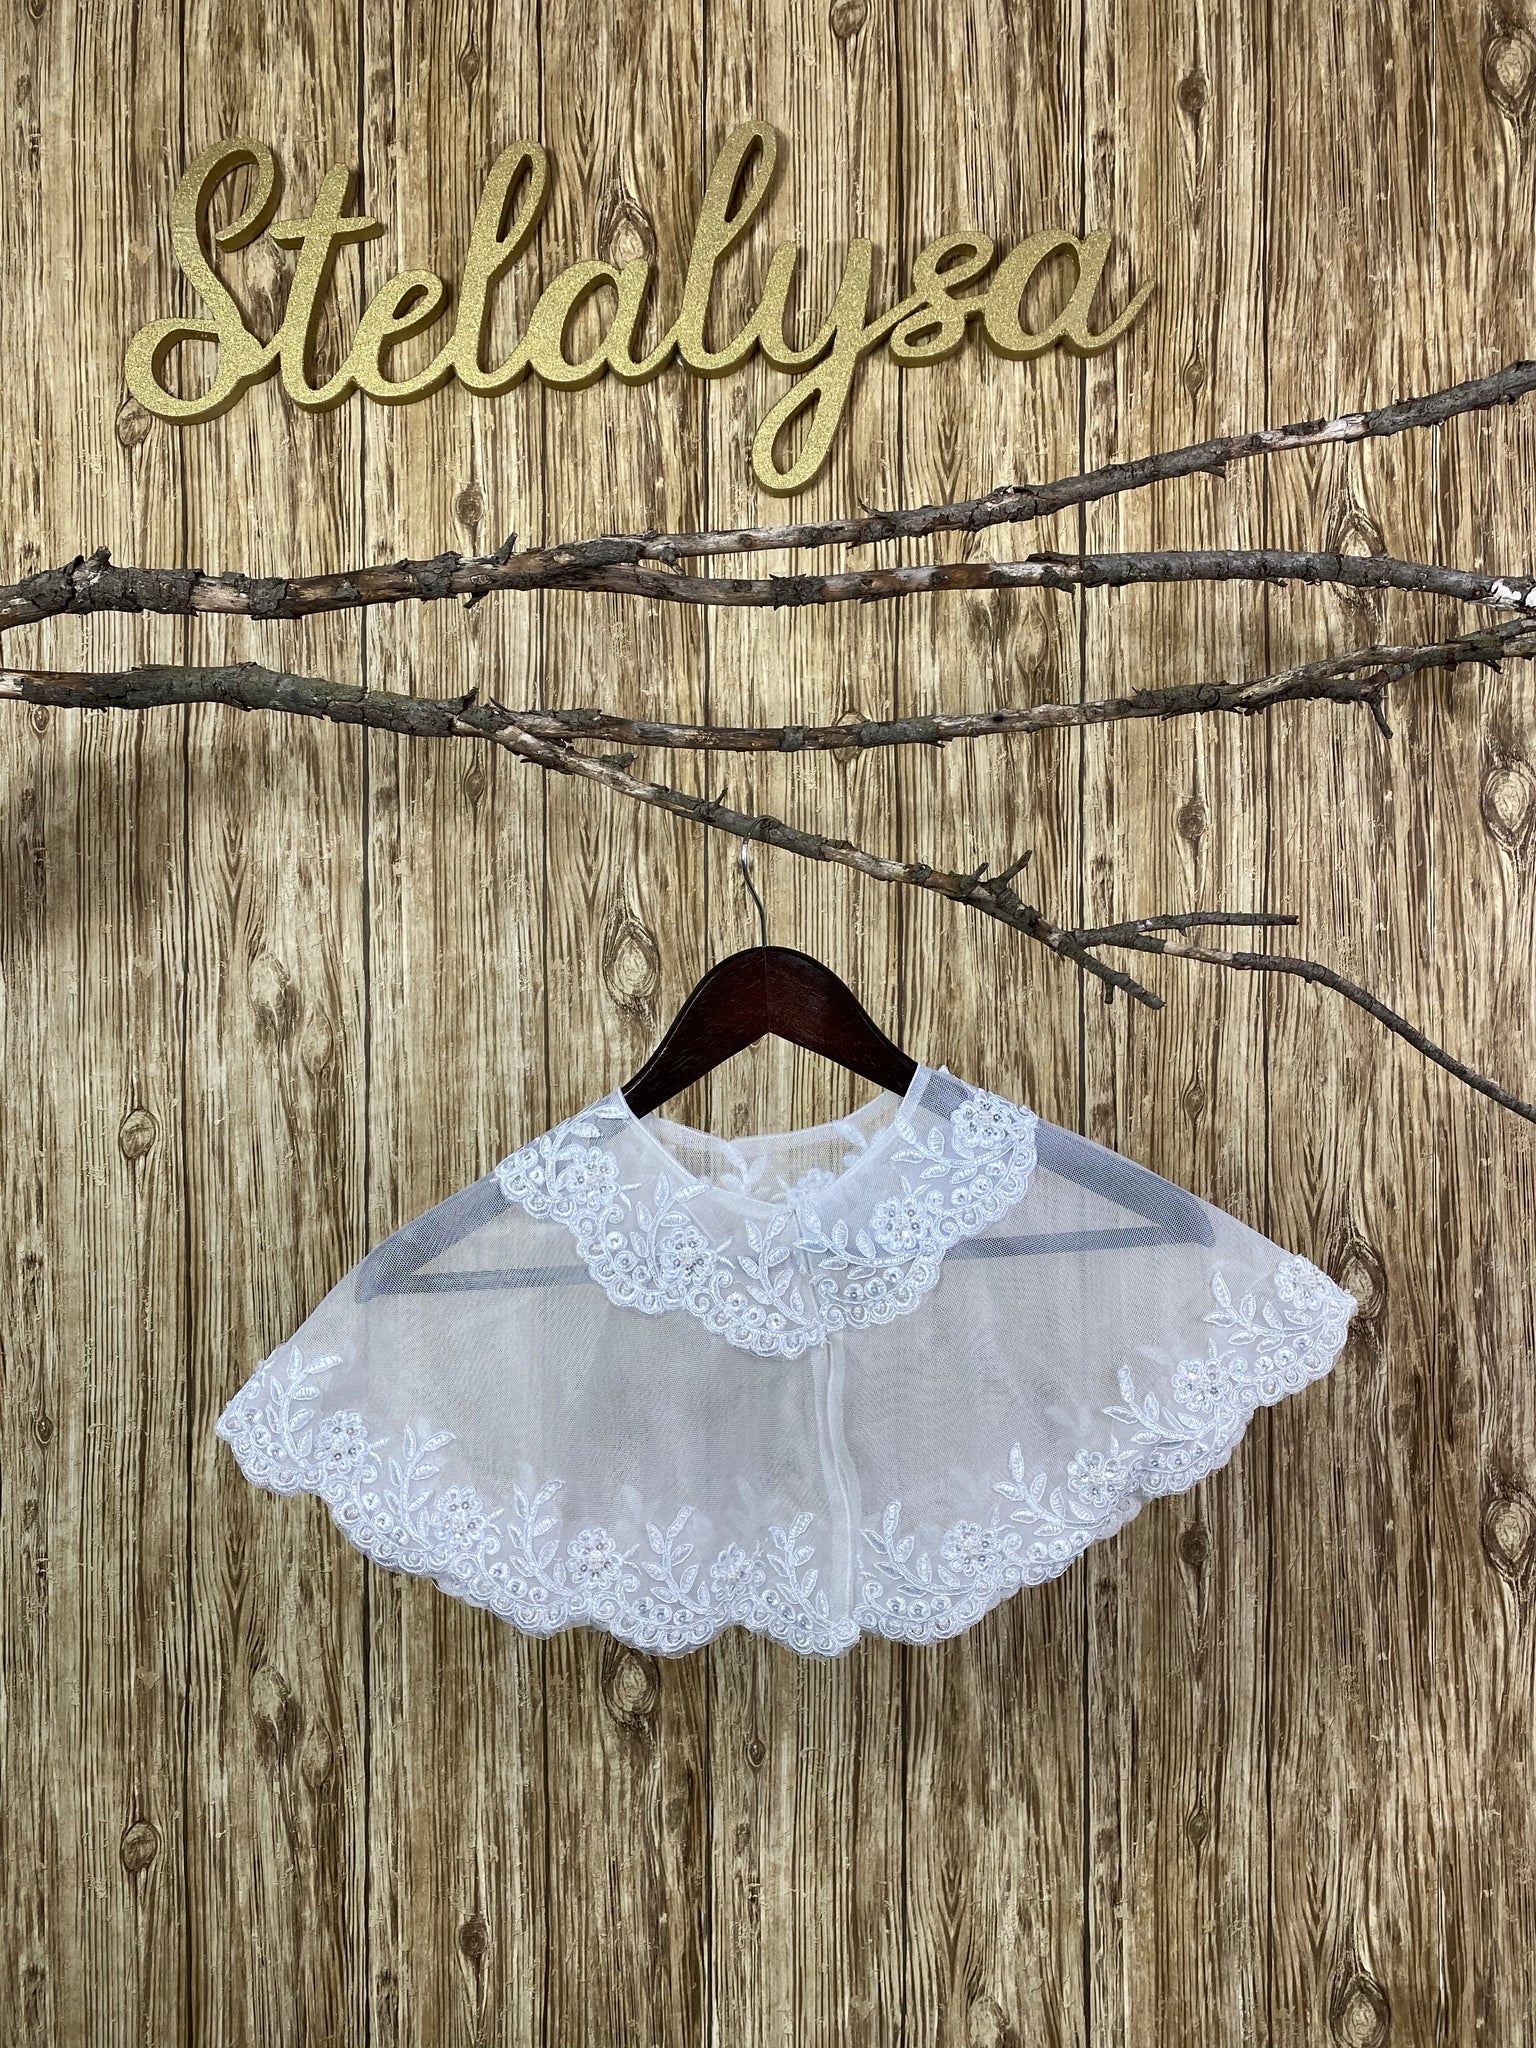 Beautiful tulle shawl with embroidered lace, along a scalloped edge.  This shawl can be worn with either a white or ivory communion dress/gown from our collection.  She will look like a princess wearing this elegant shawl on her special day!